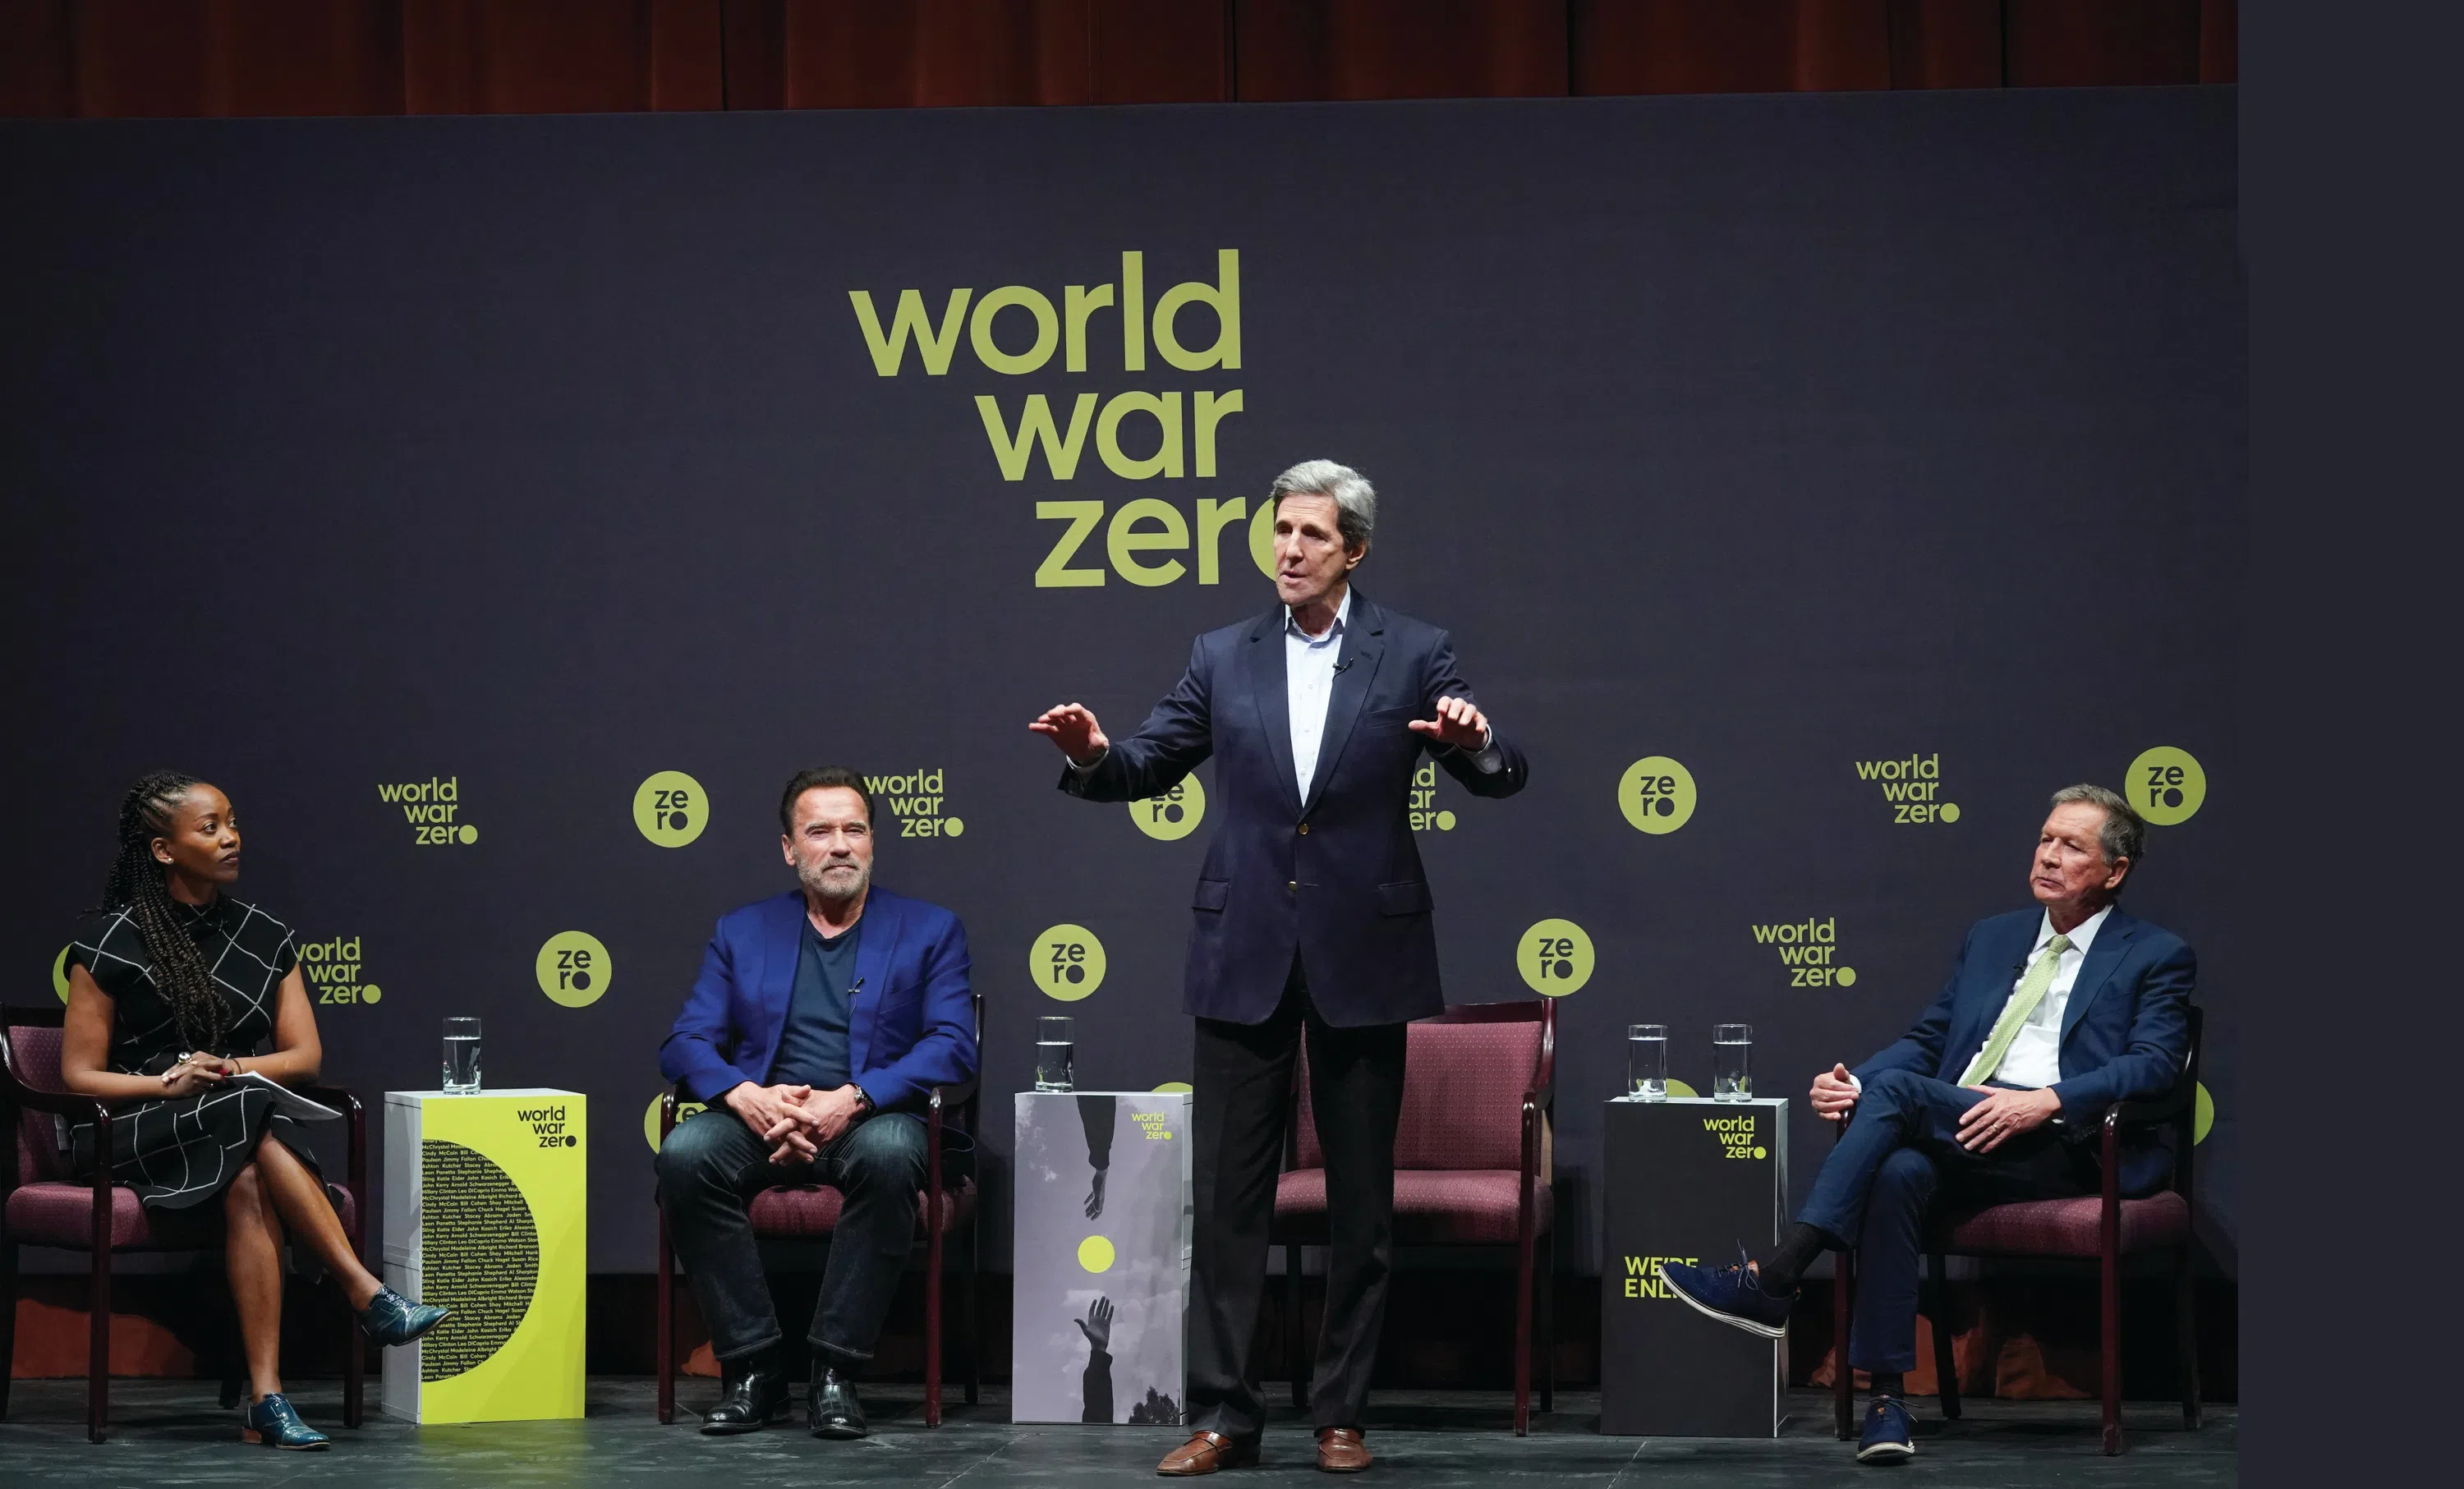 A group of people on stage at a lecture. The backdrop reads "world war zero"